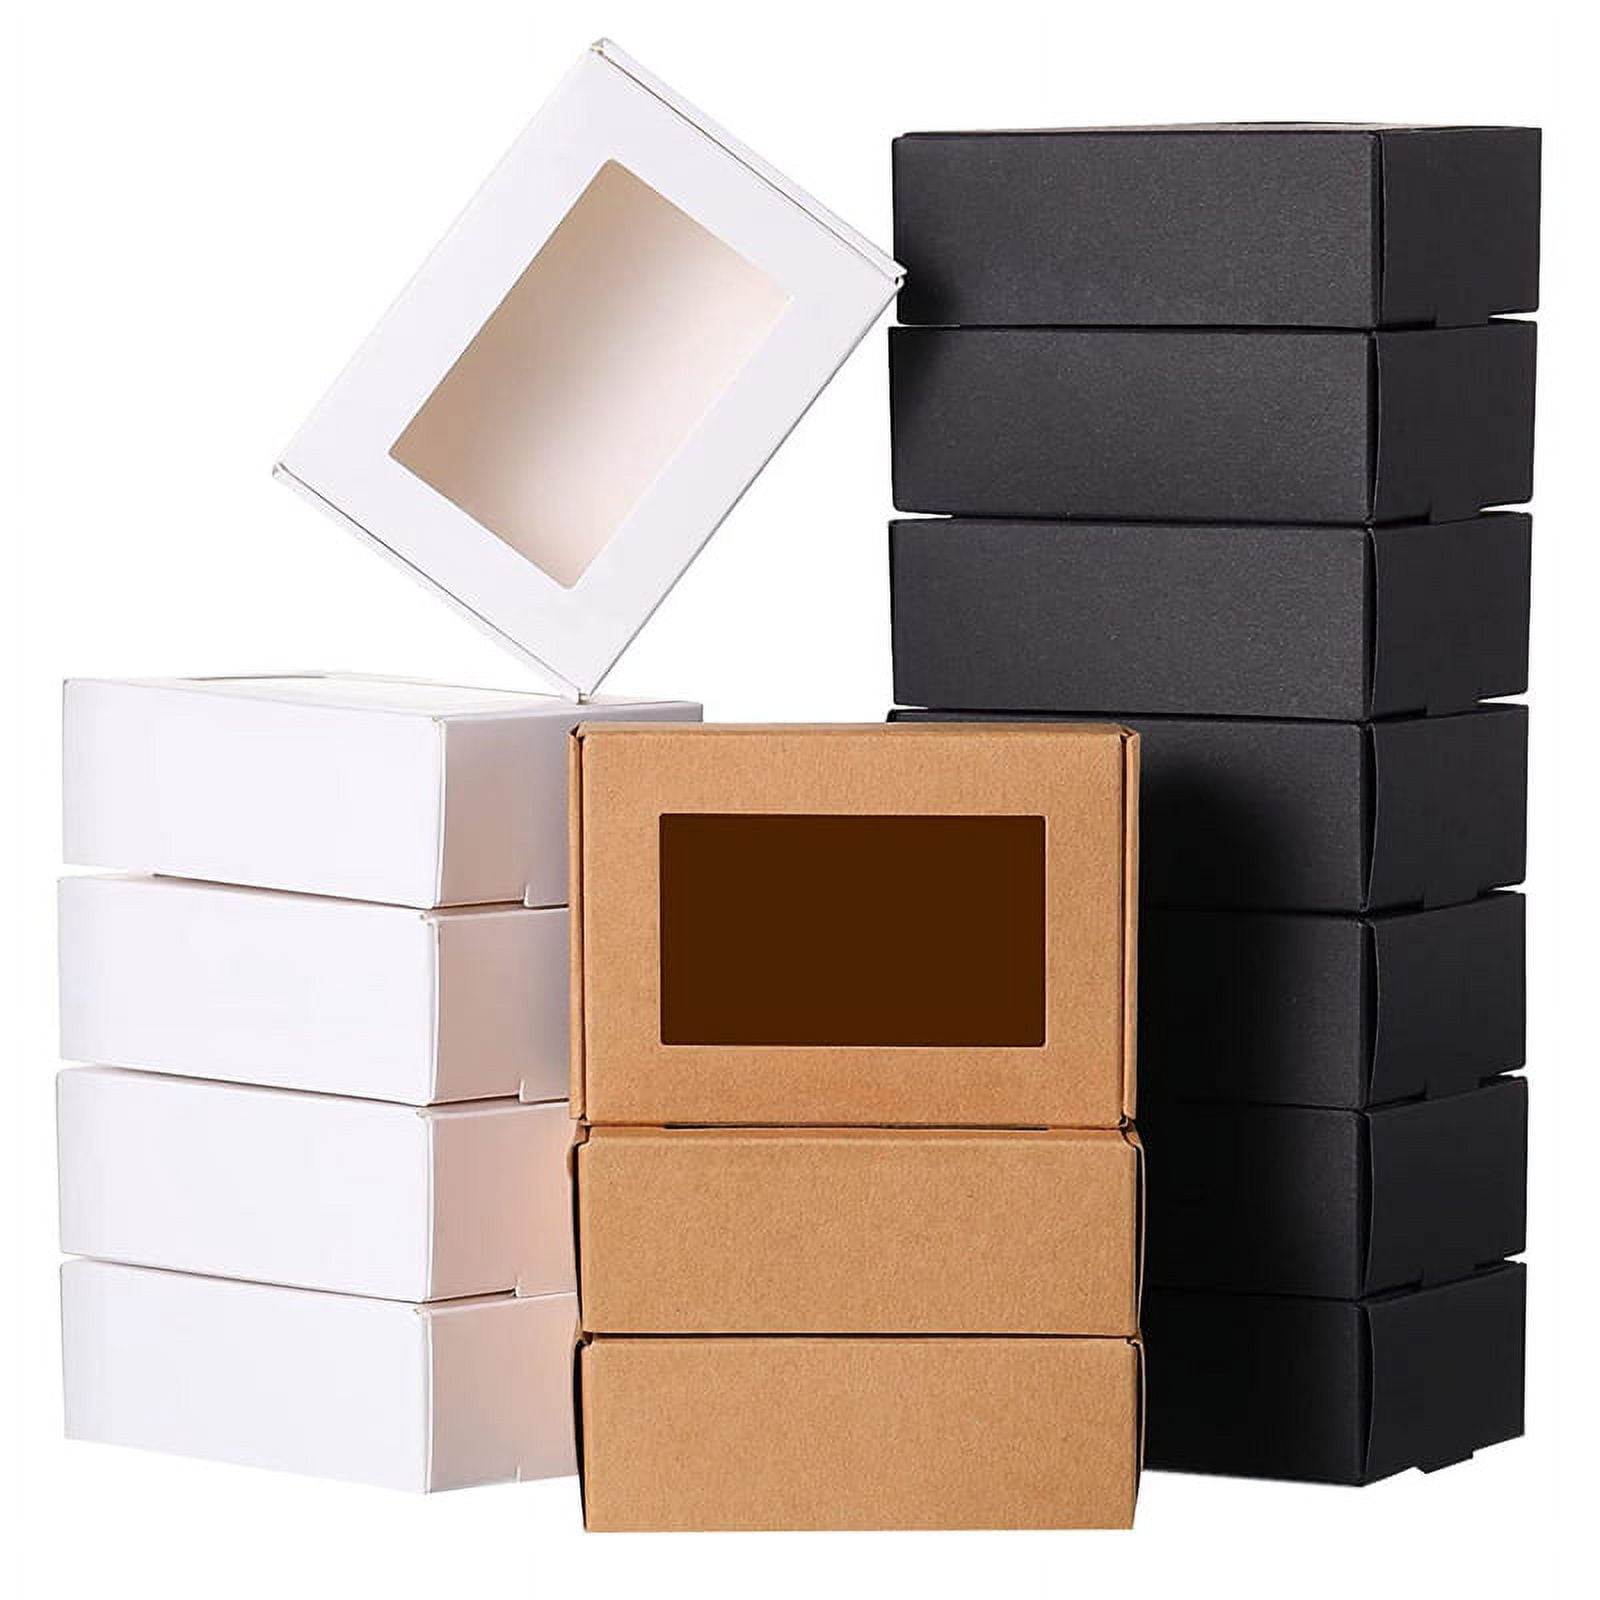 100Pcs Clear Plastic Boxes for Gifts Pvc Packing Box Gift